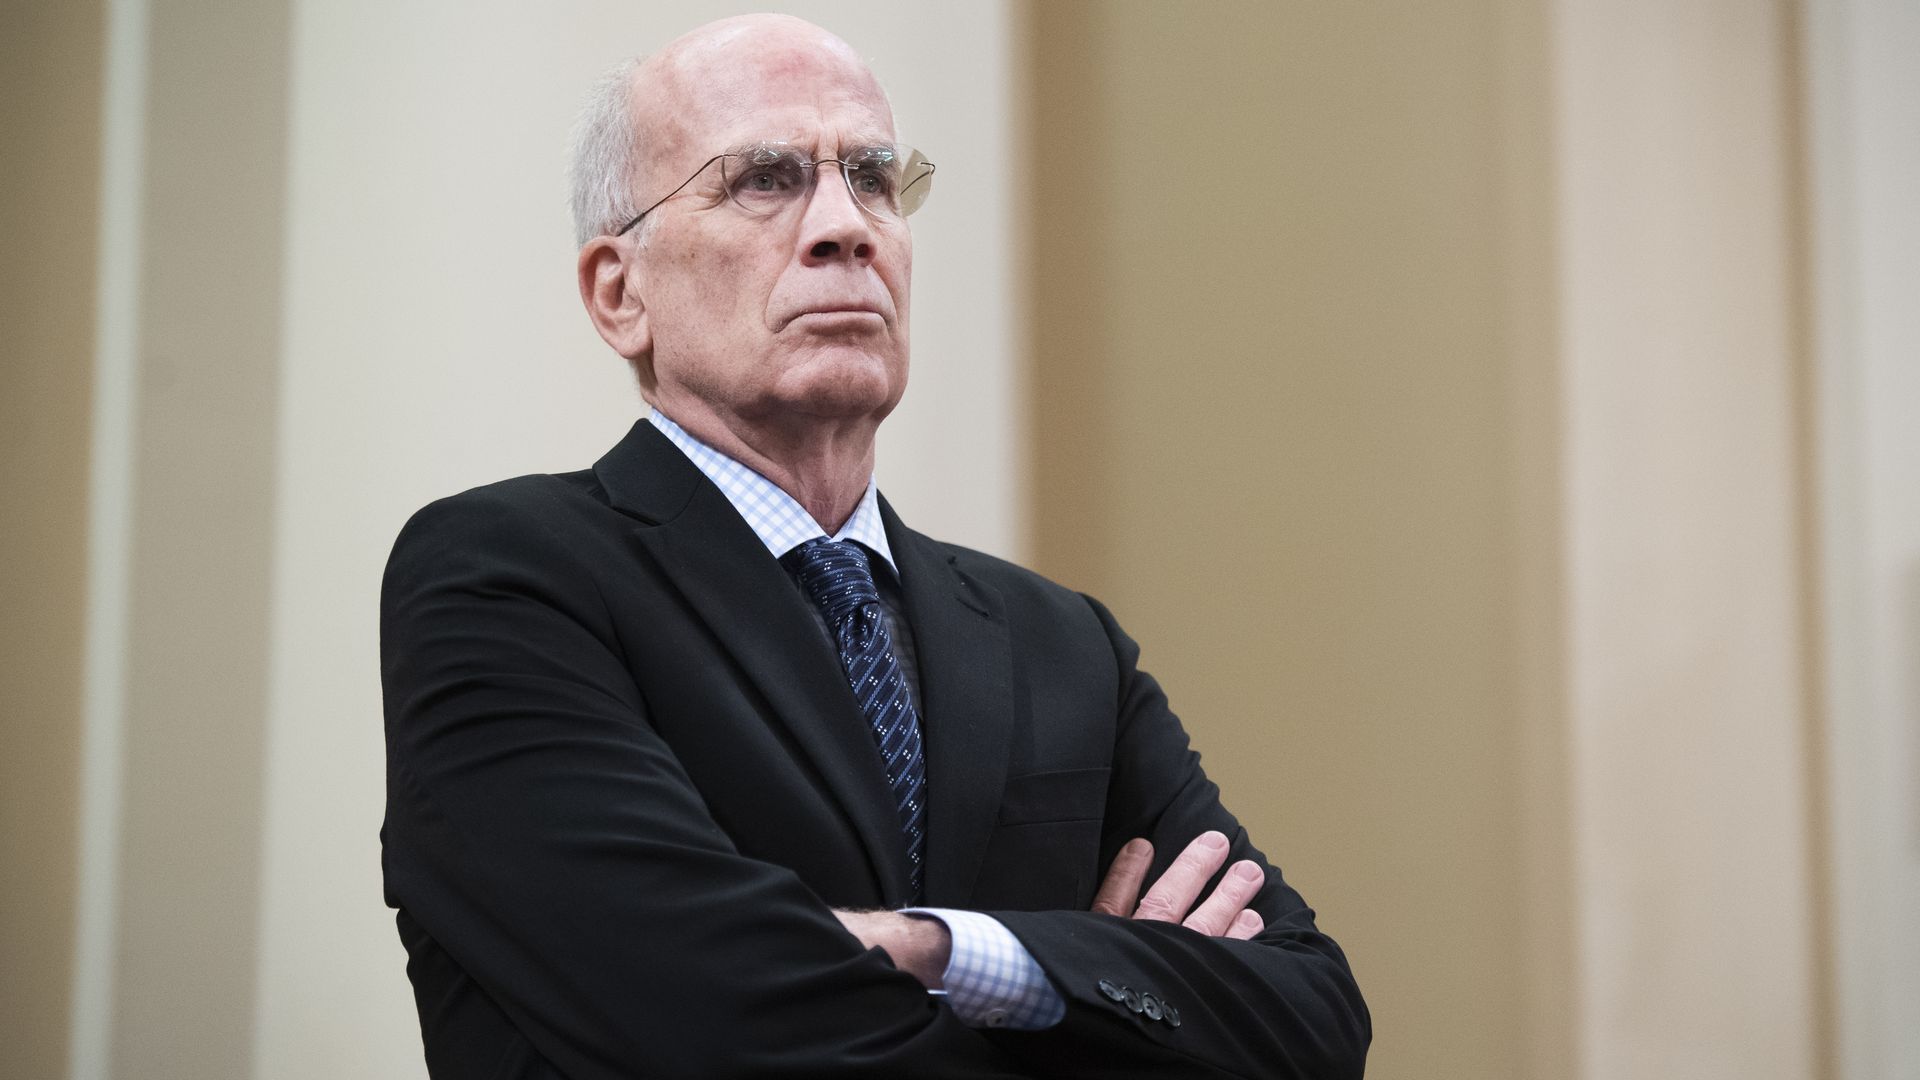 Sen. Peter Welch is seen standing, with his arms crossed.